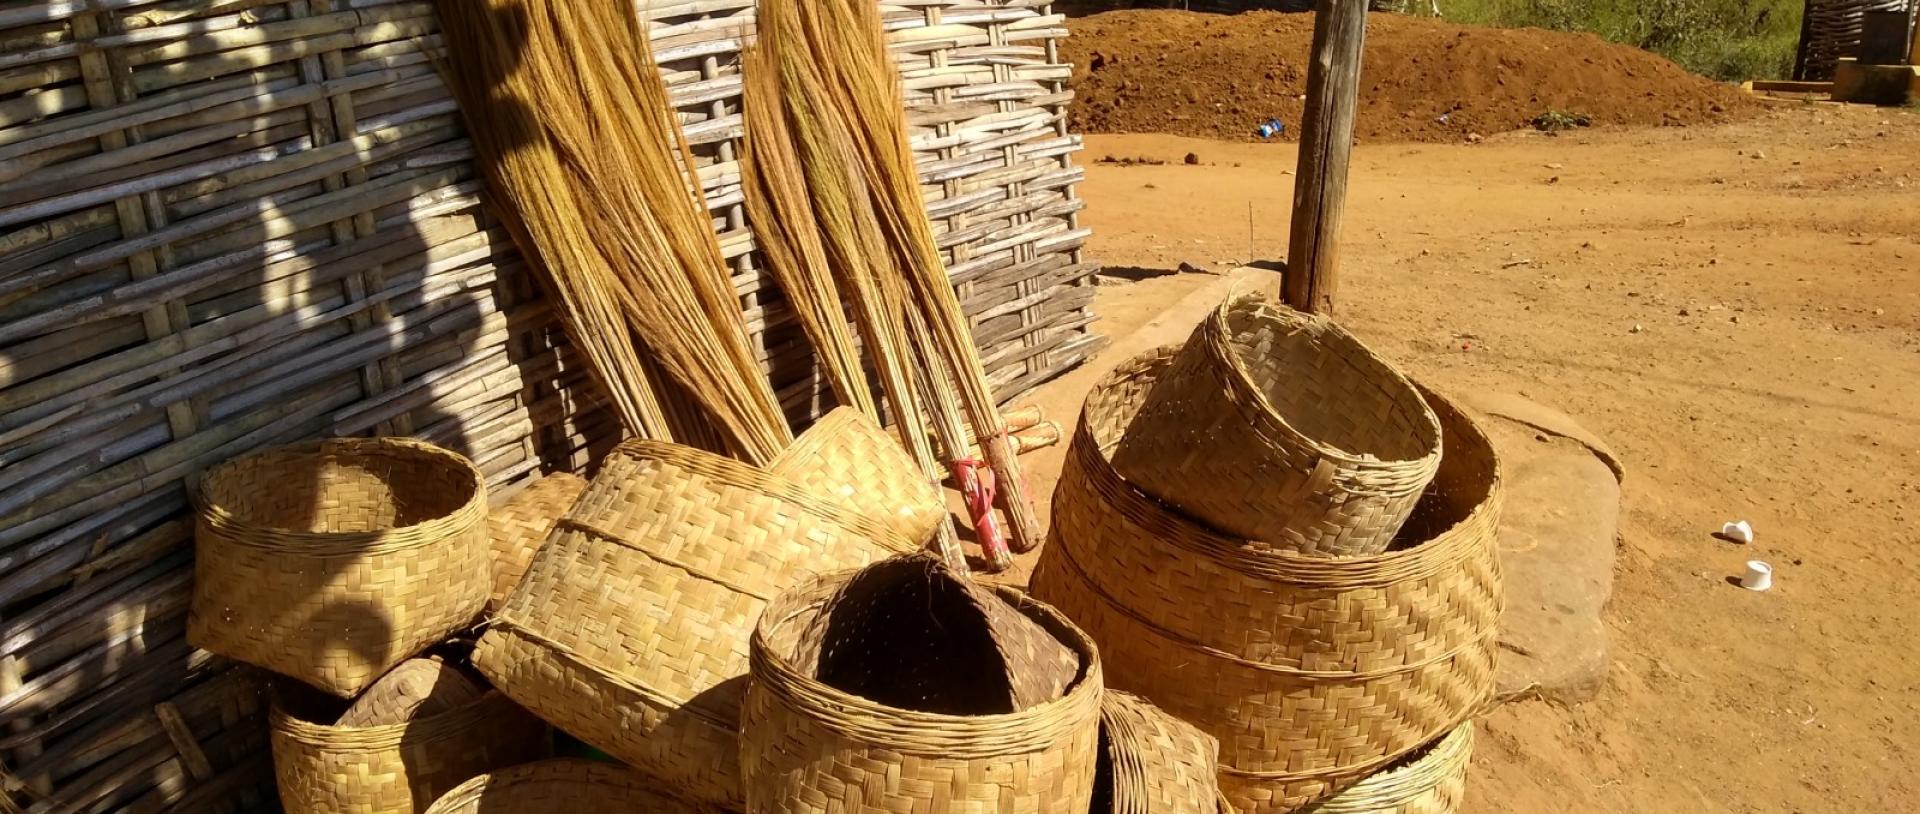 Communities make multiple utensils and products from bamboo in the Northern Eastern Ghats